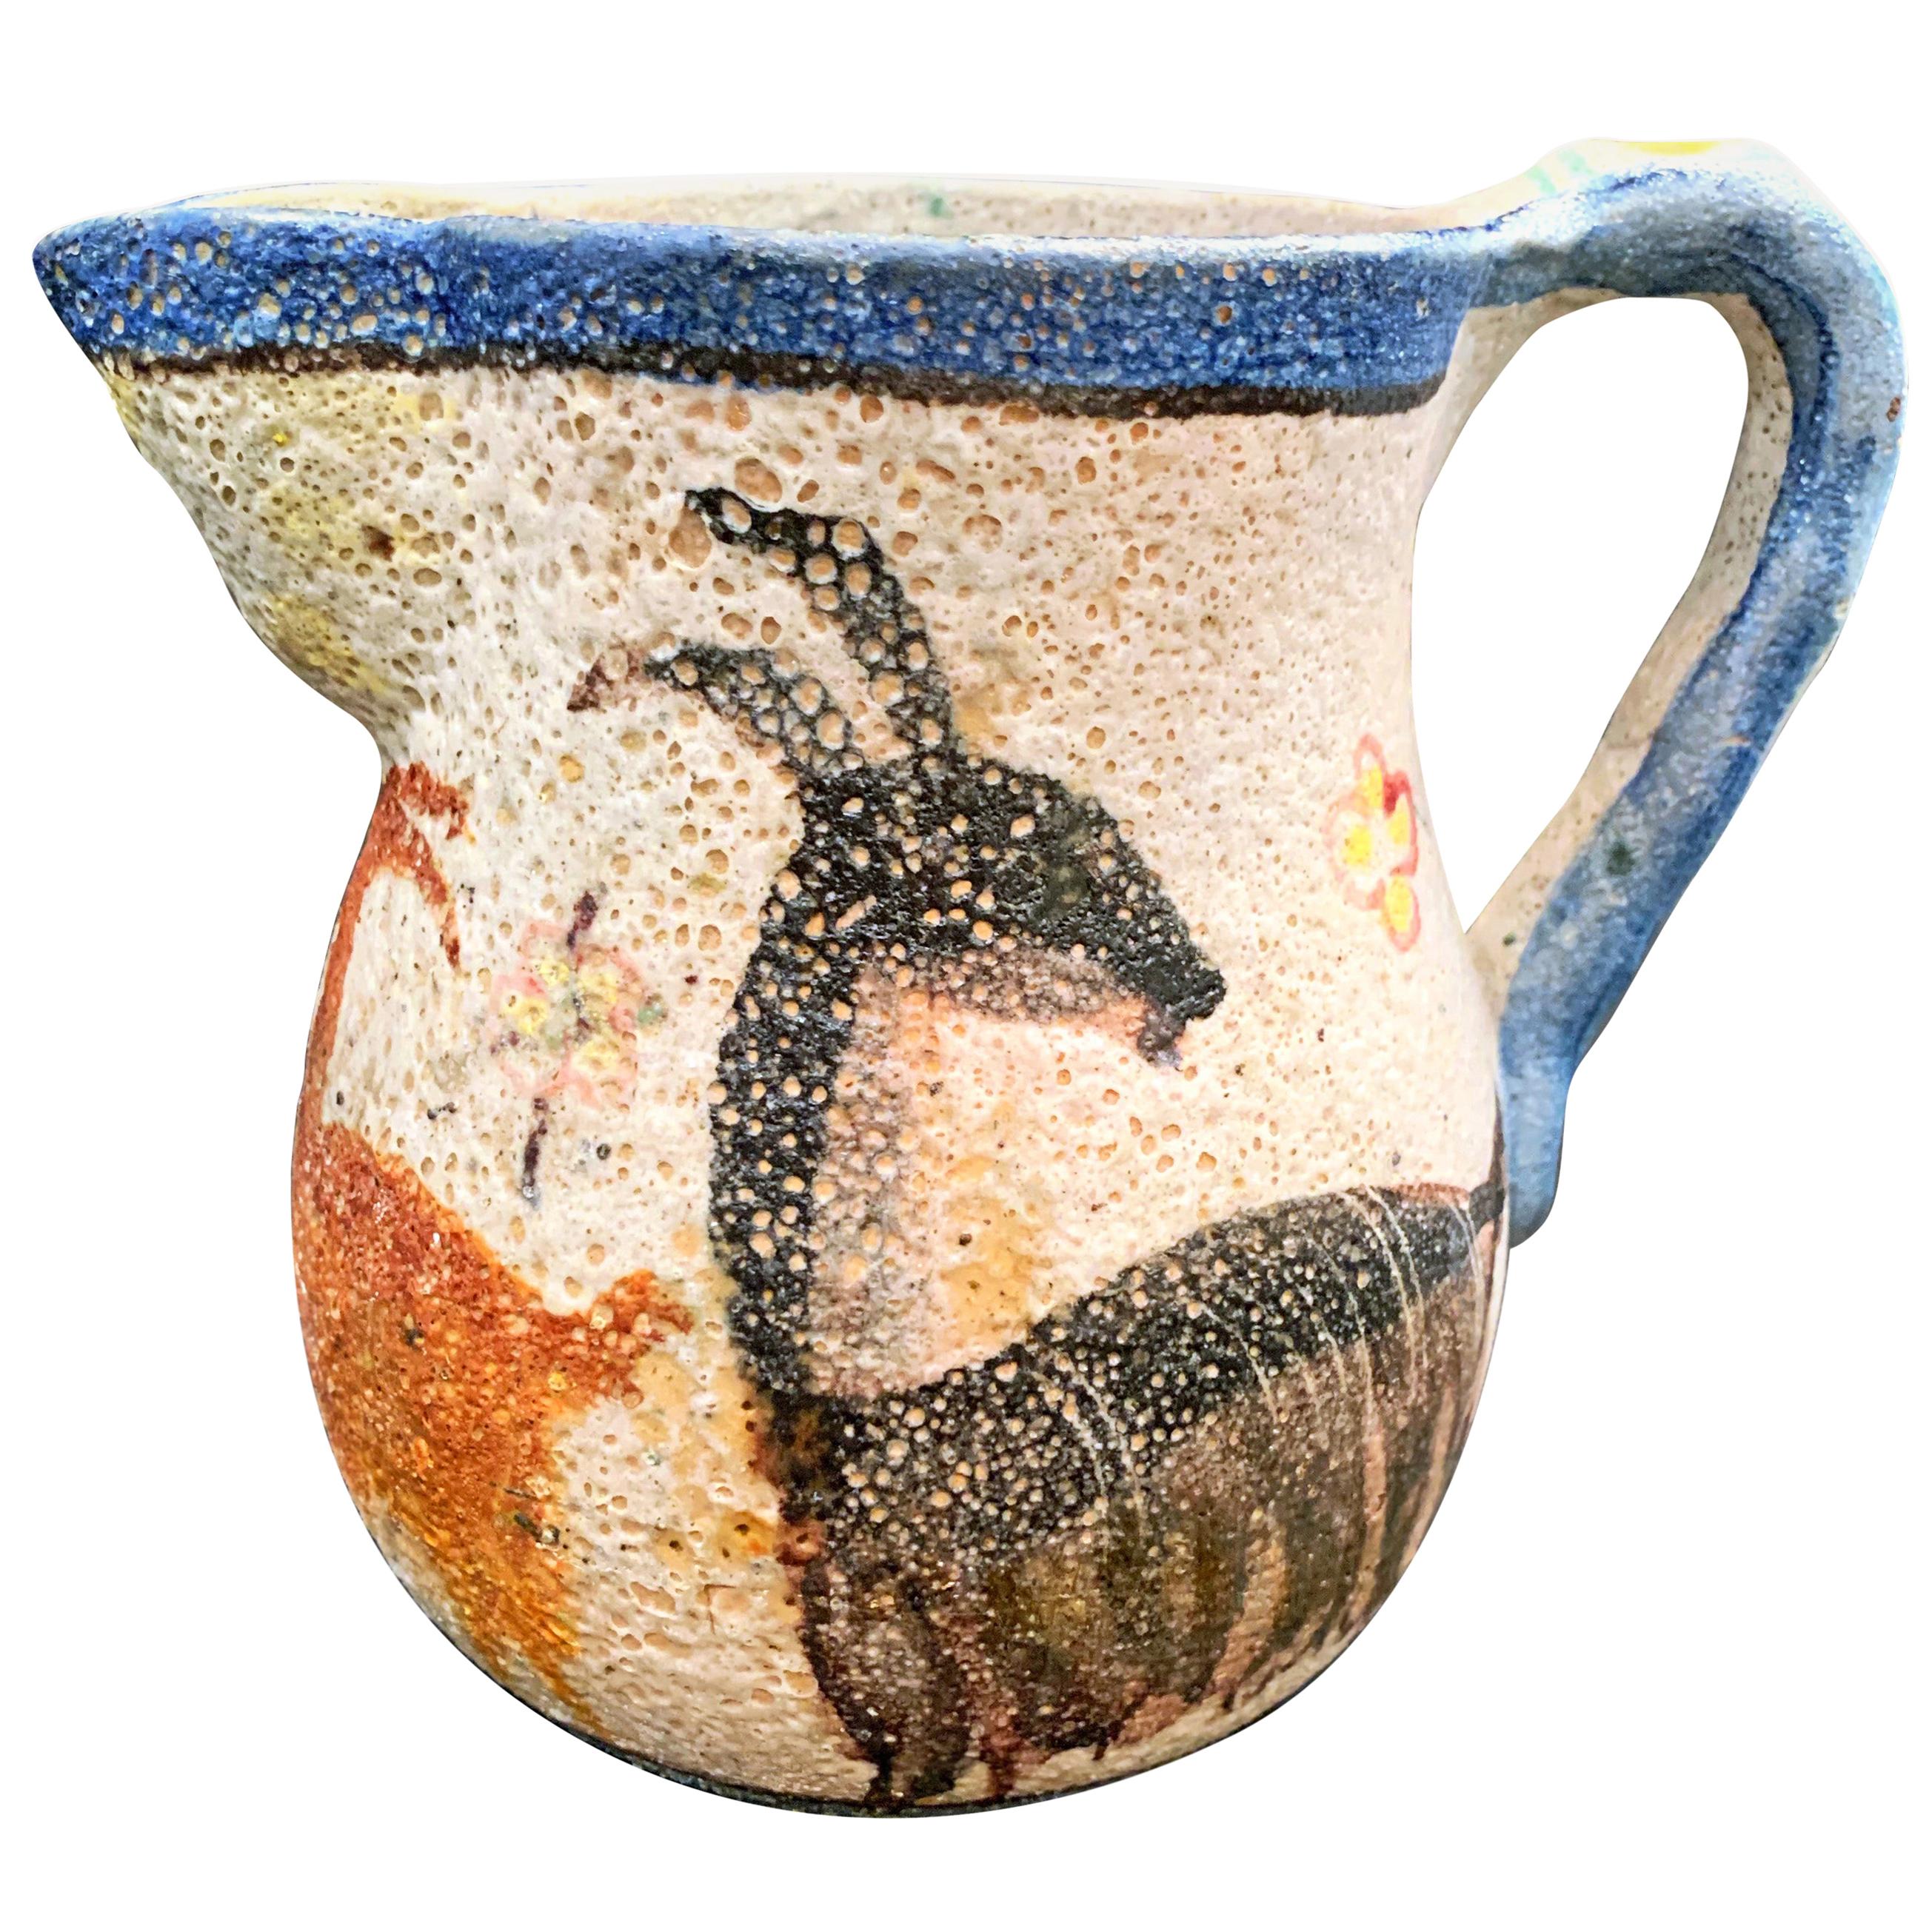 "Frieze of Goats," Important 1930s Pitcher by I.C.S., Likely by Gambone